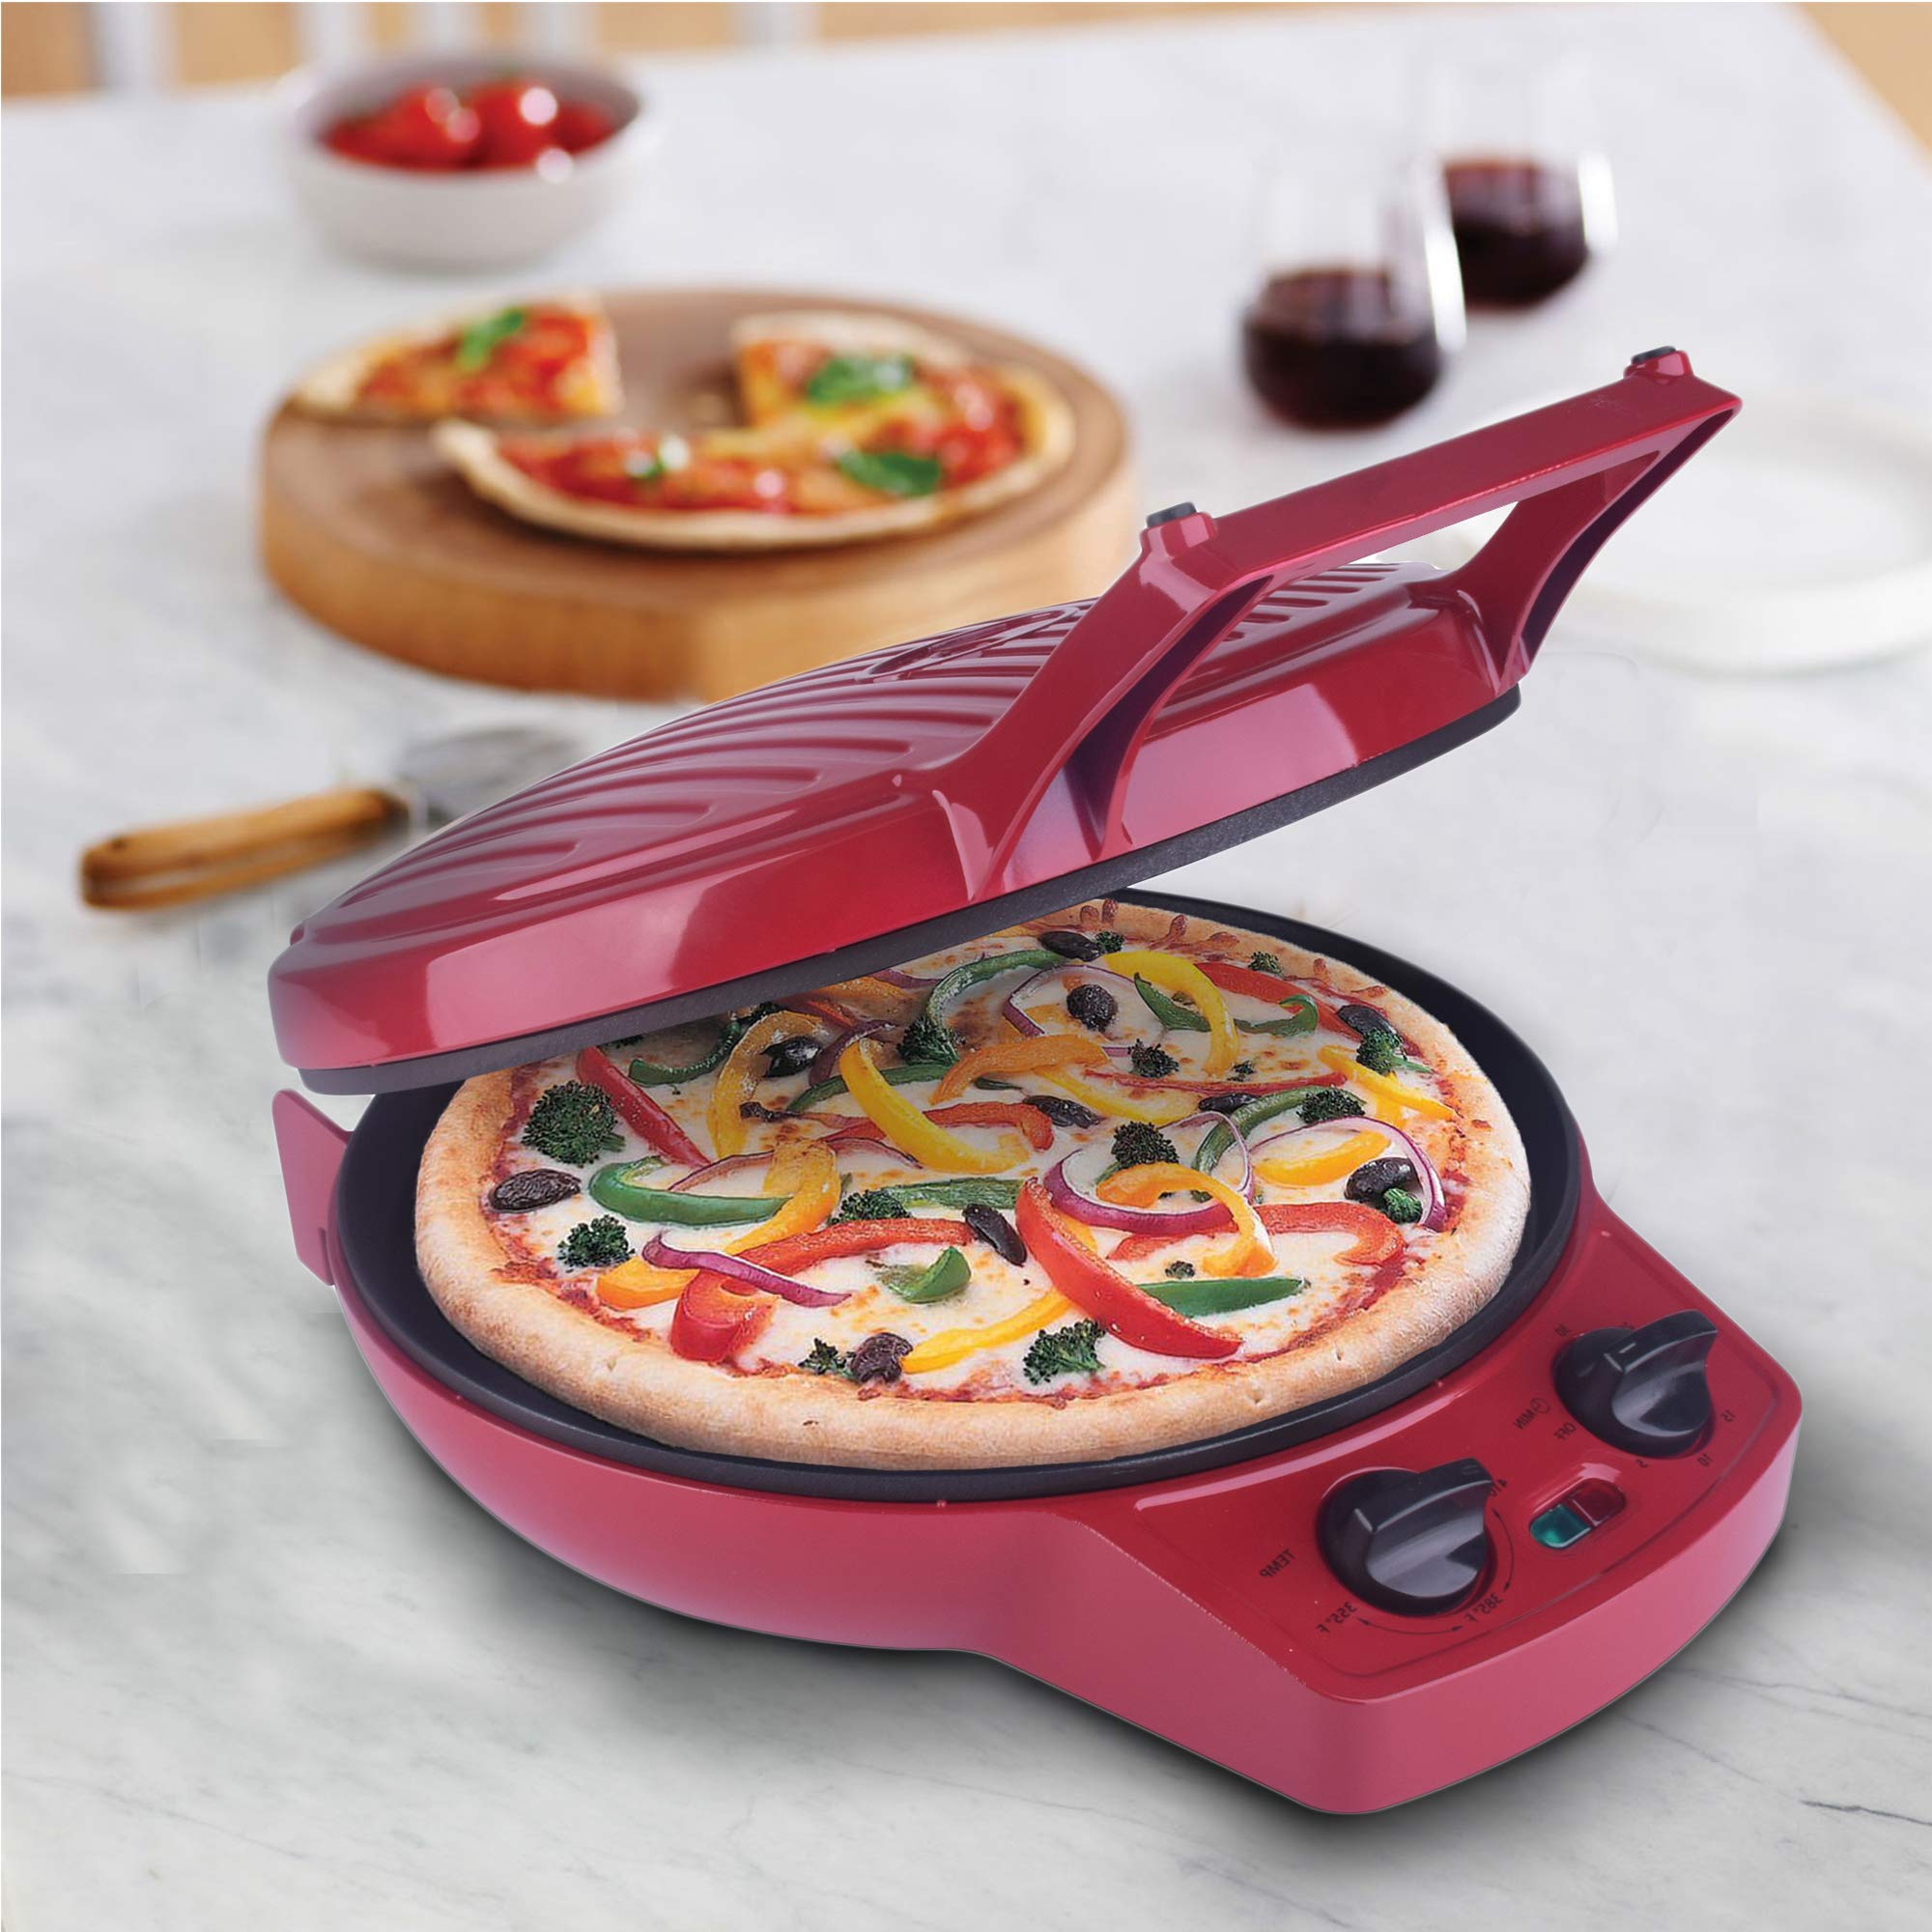 Courant Pizza Maker, 12 Inch Pizza Cooker and Calzone Maker, with Timer &Temperatures control, 1440 Watts Pizza Oven convert to Electric indoor Grill, Red